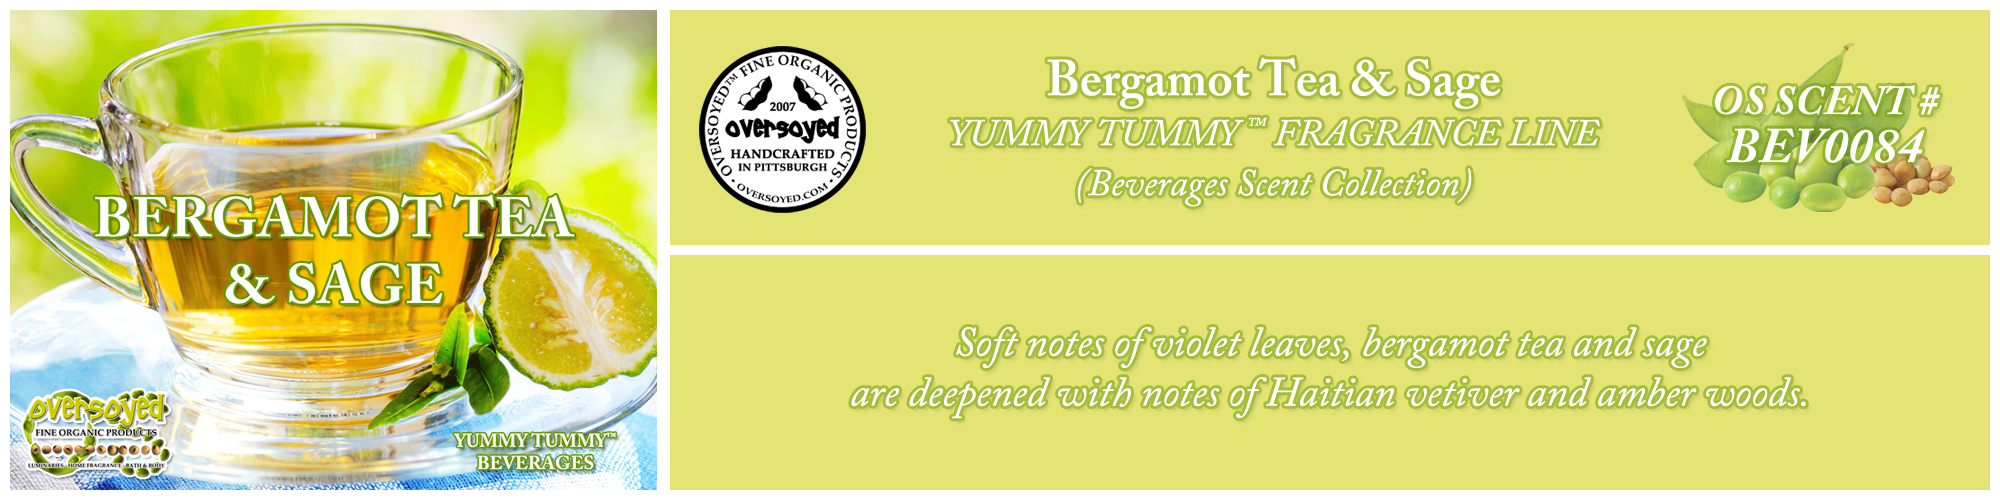 Bergamot Tea & Sage Handcrafted Products Collection